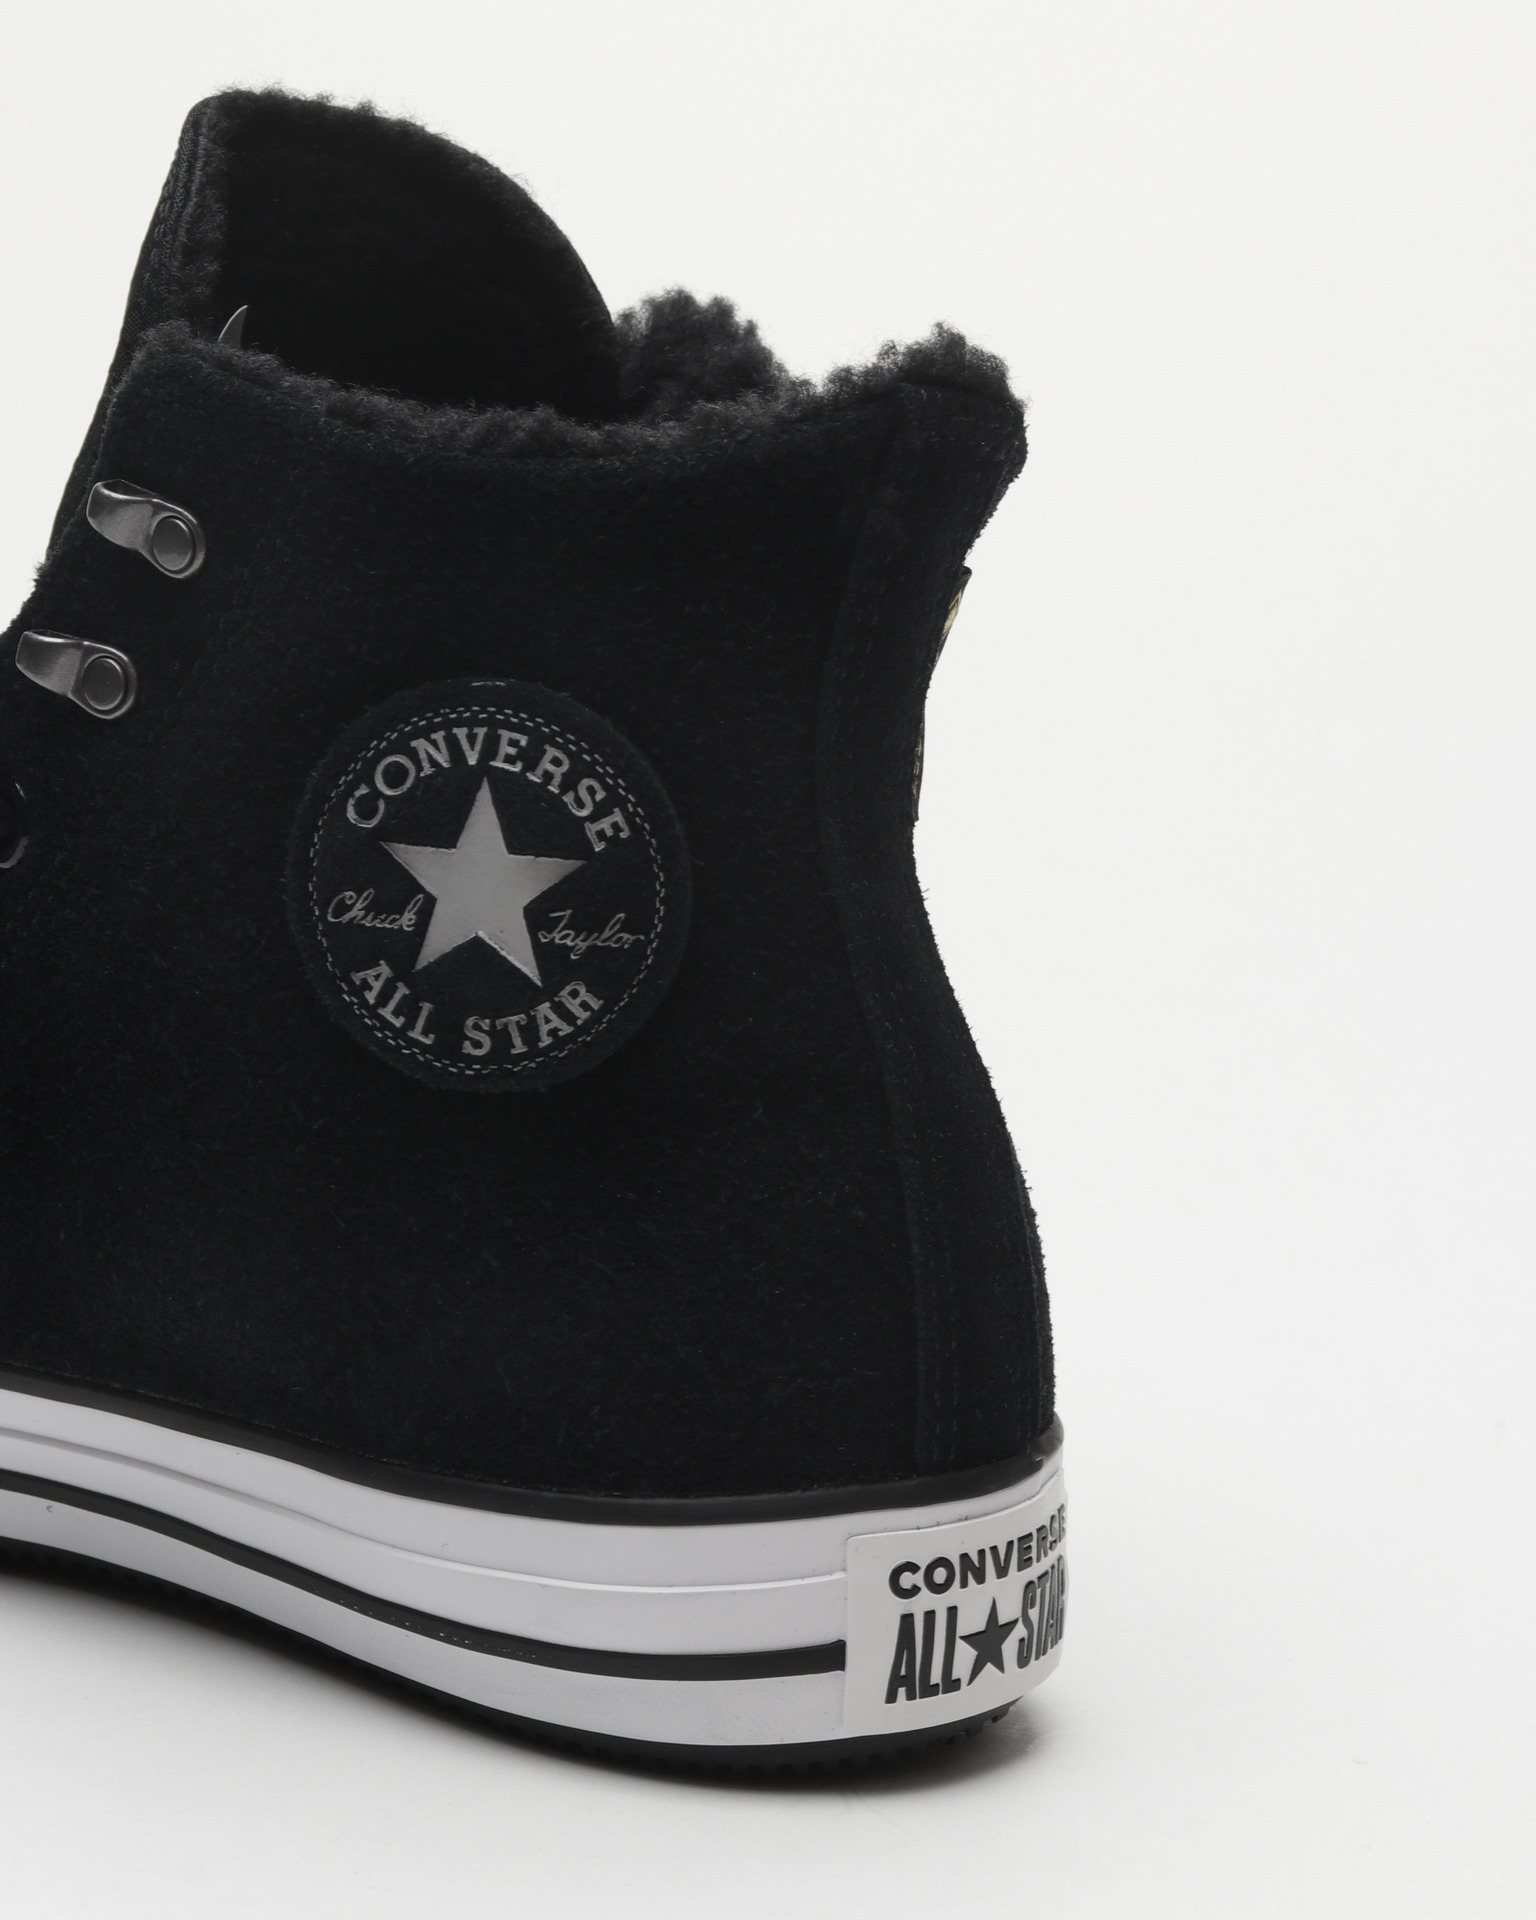 specifikation Articulation Råd Converse - Chuck Taylor All Star Winter Sneakers Bibloo.com